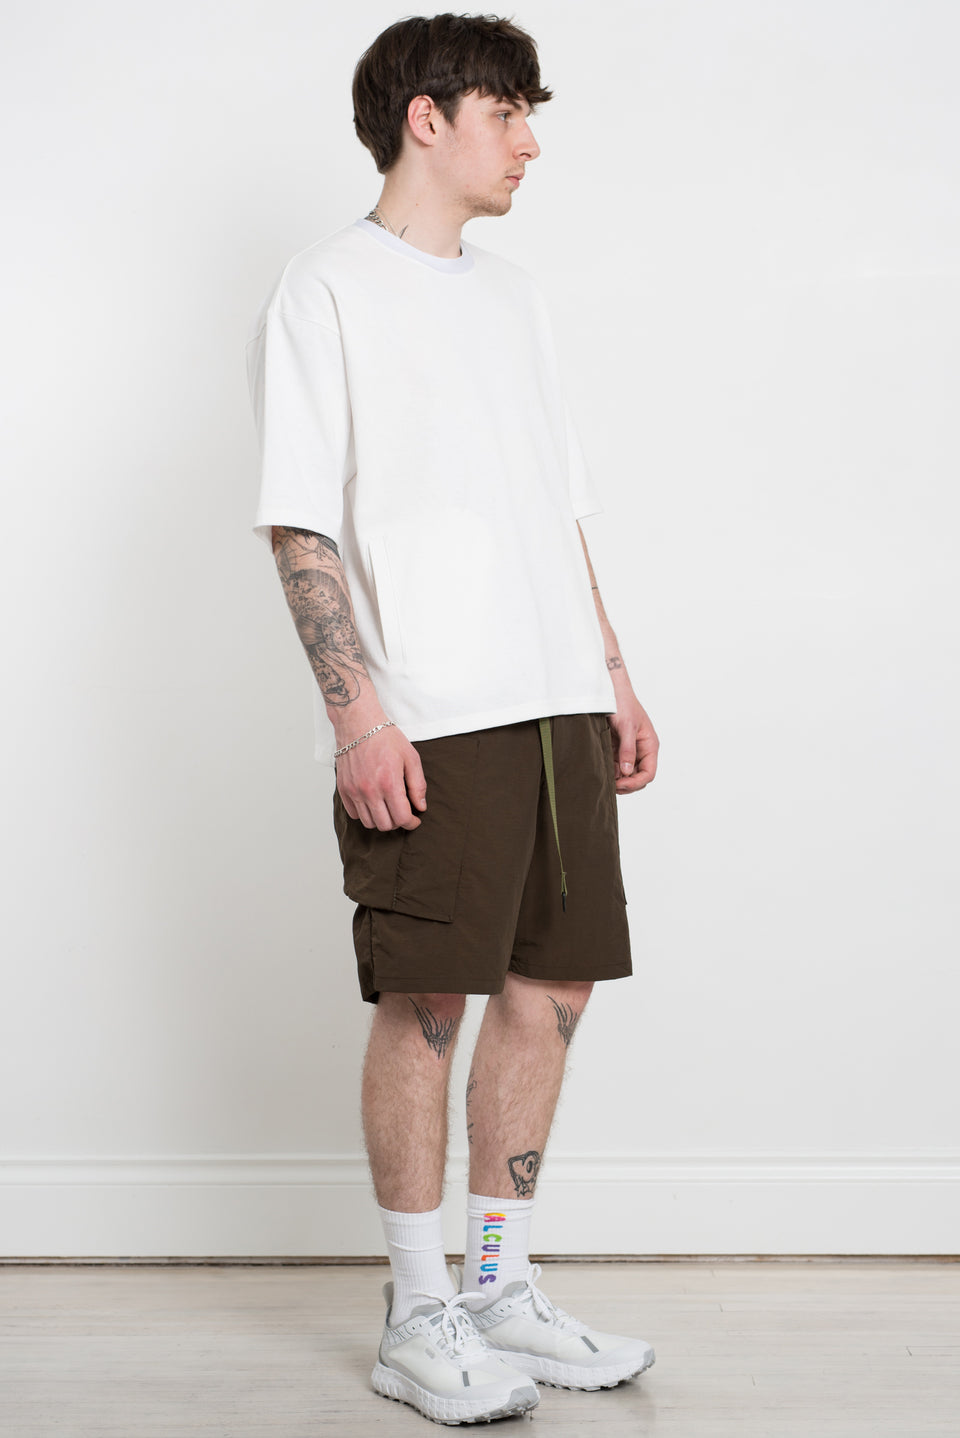 CMF Outdoor Garment 23SS SS23 Comfy Outdoor Garment Slow Dry Tee Half Sleeve White Calculus Victoria BC Canada